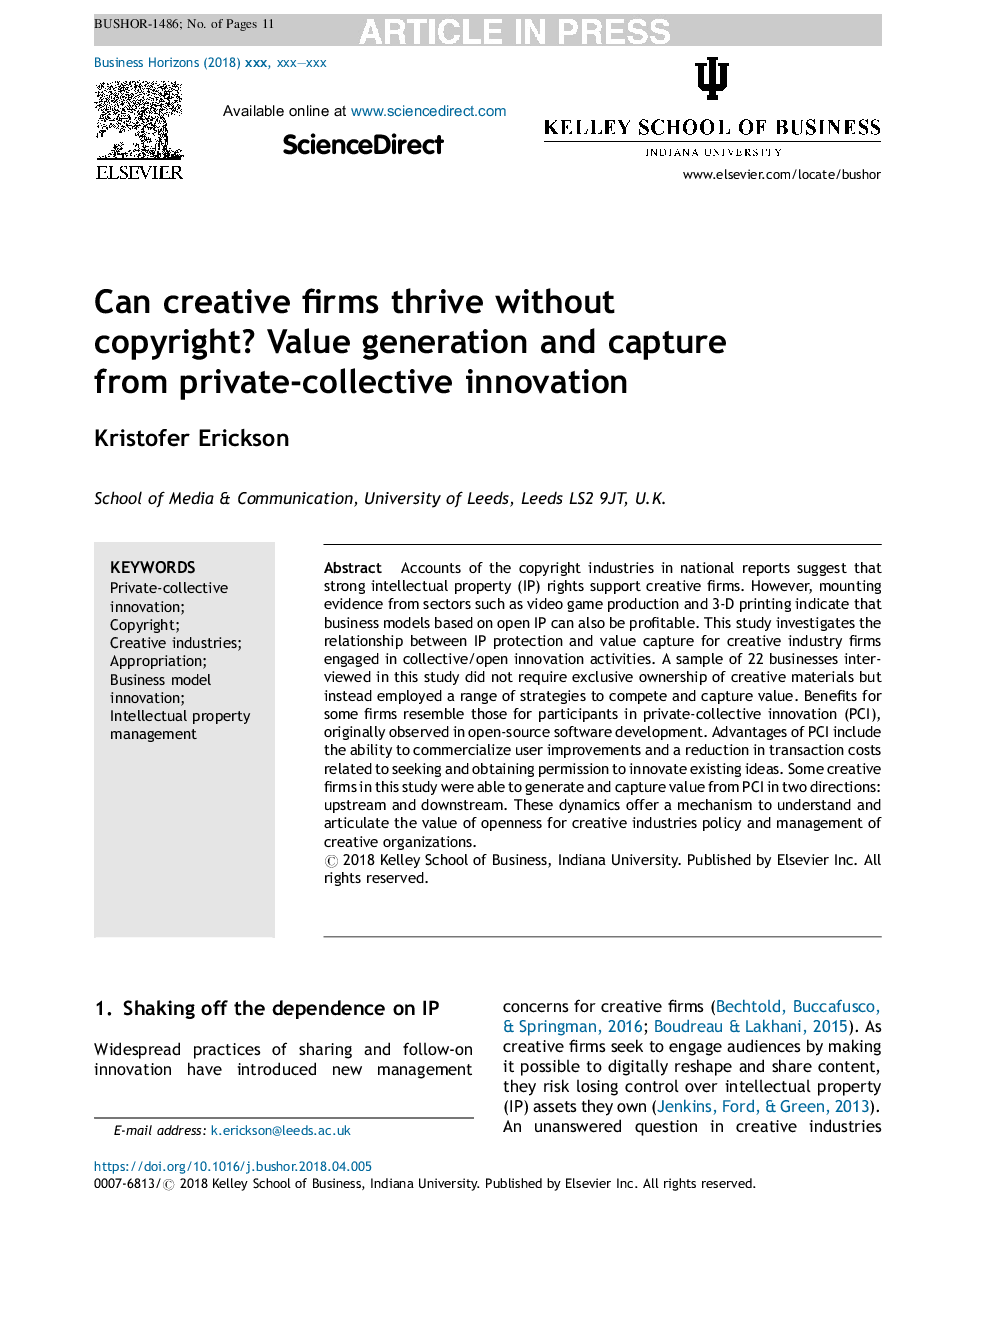 Can creative firms thrive without copyright? Value generation and capture from private-collective innovation